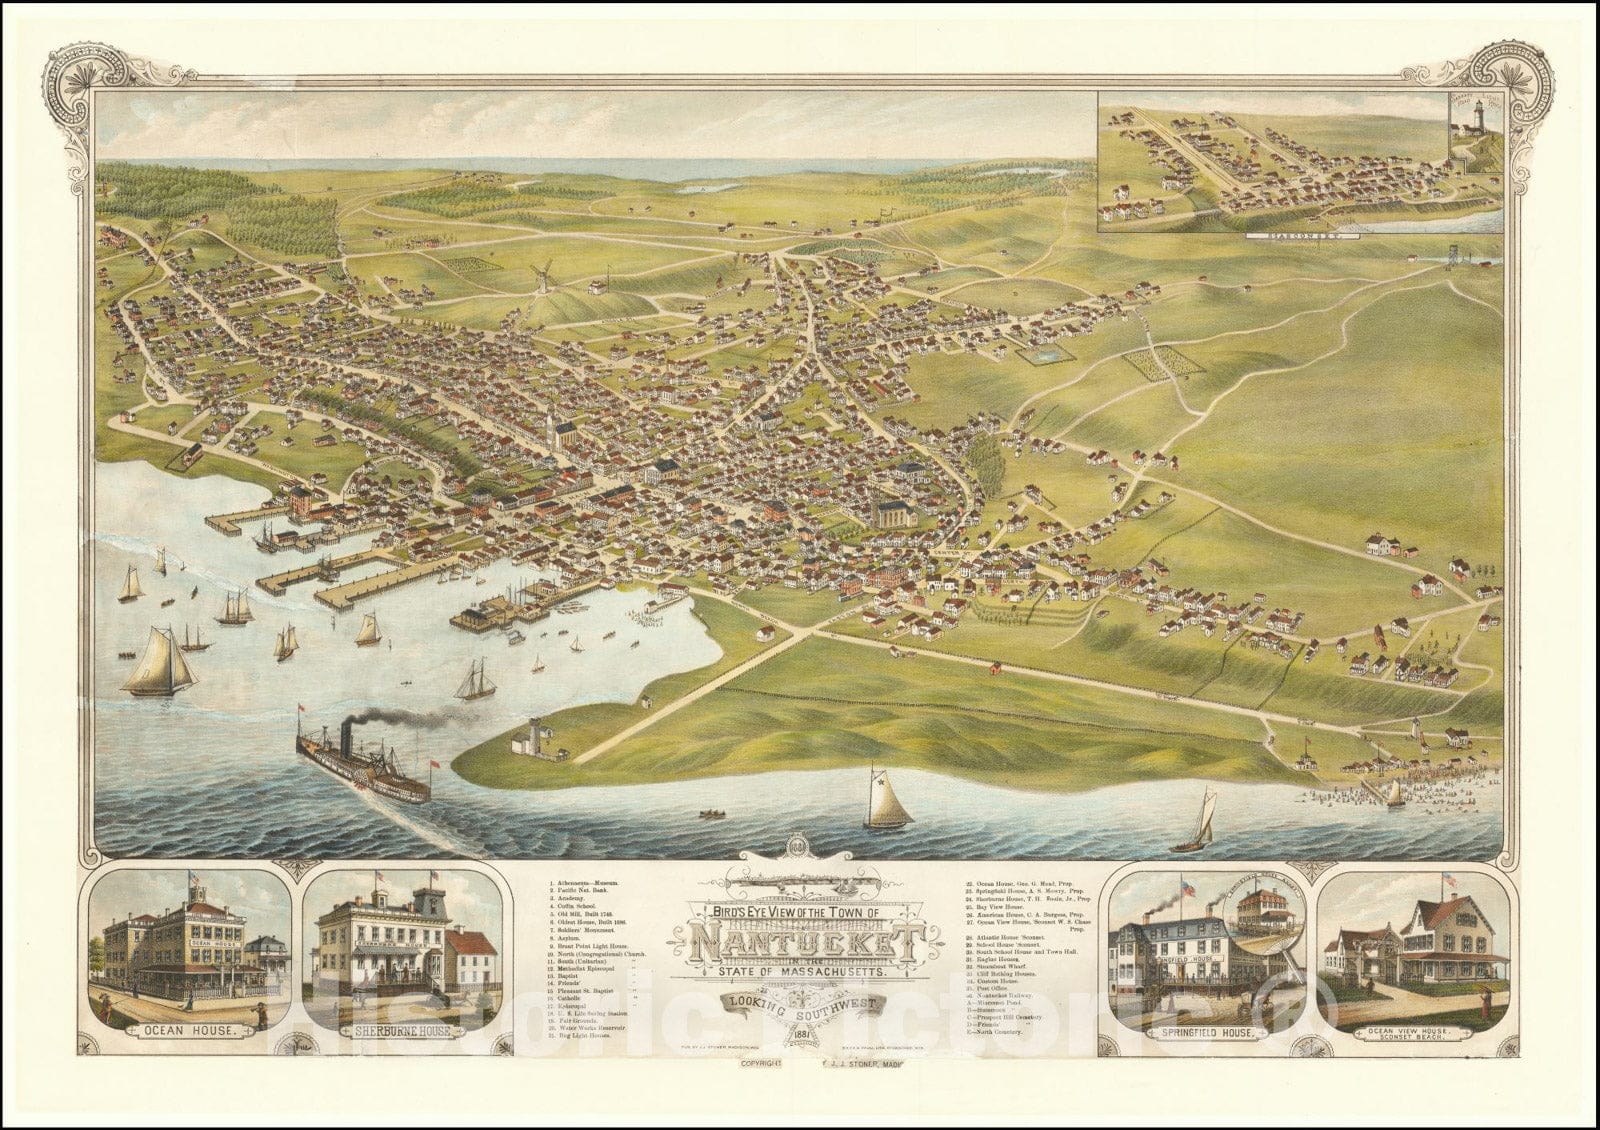 Historic Map : Bird's Eye View of the Town of Nantucket State of Massachusetts.Looking Southwest.1881., 1881, Vintage Wall Art